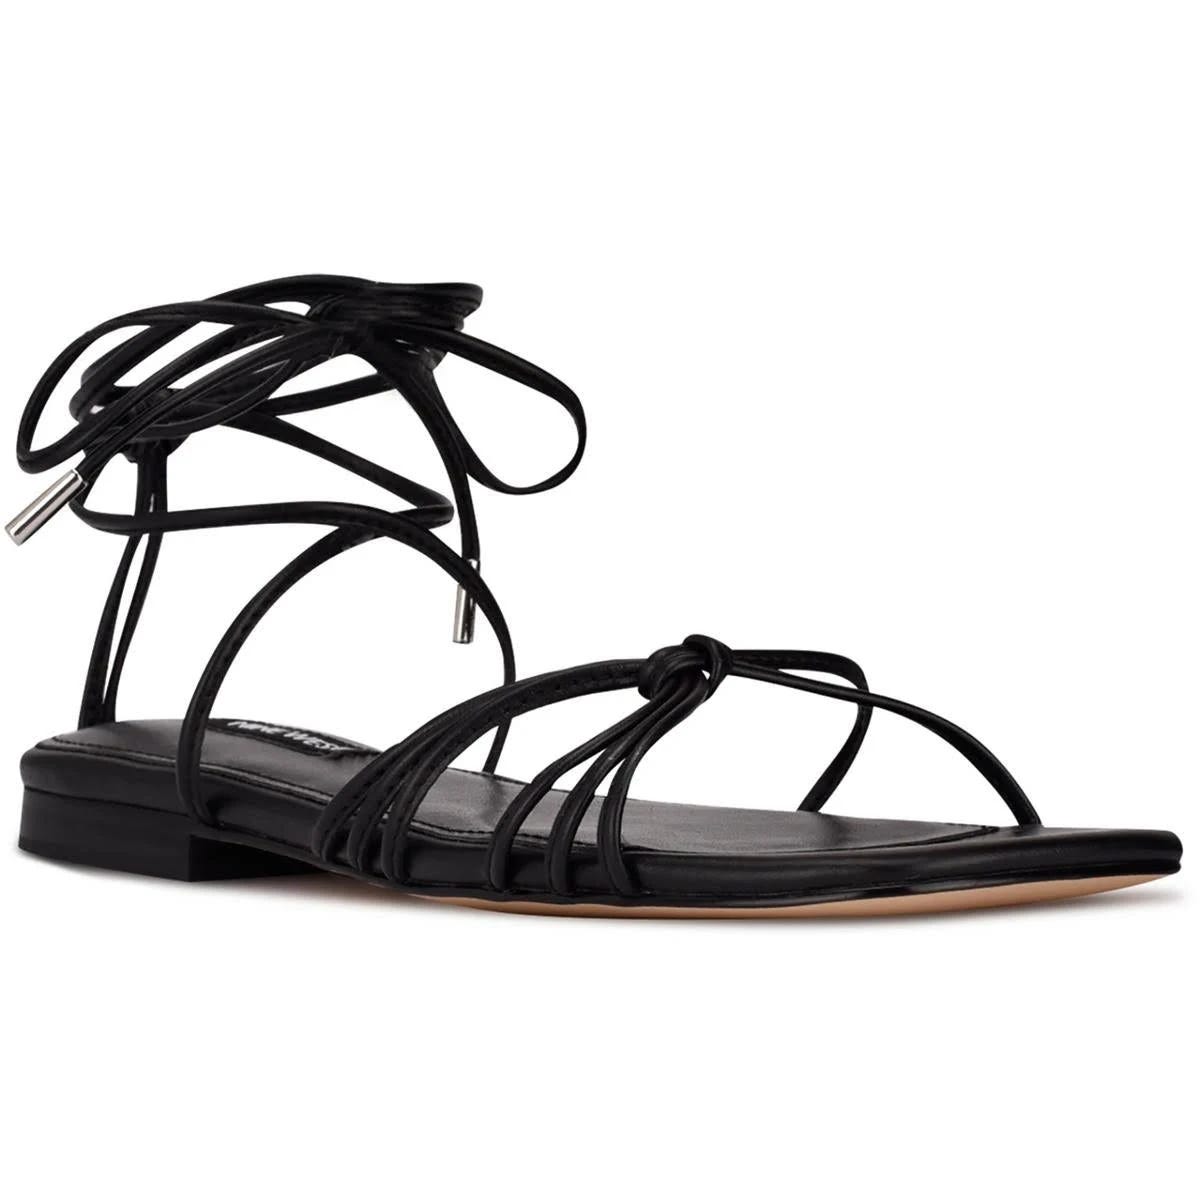 Stylish Strappy Black Sandals from Nine West | Image